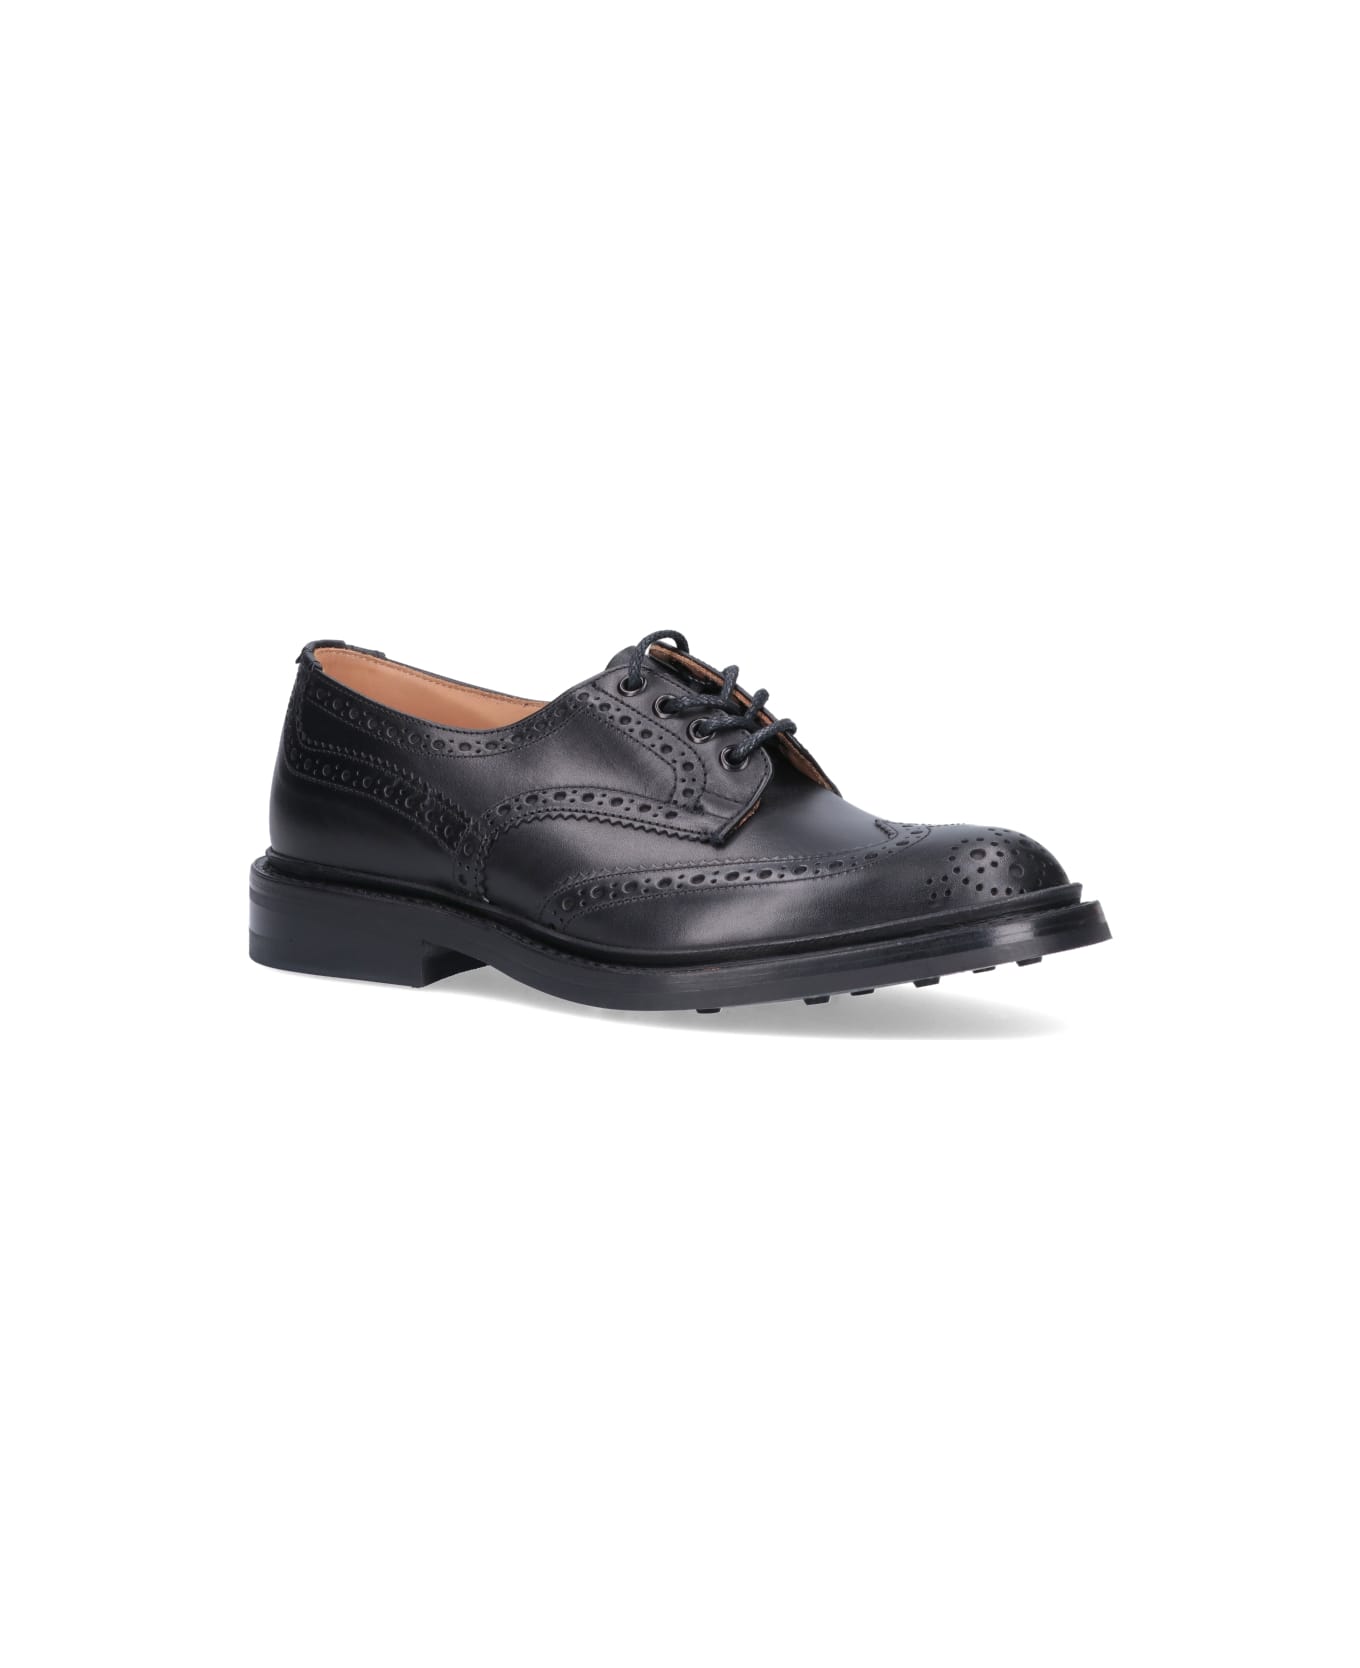 Tricker's Laced Shoes - Black